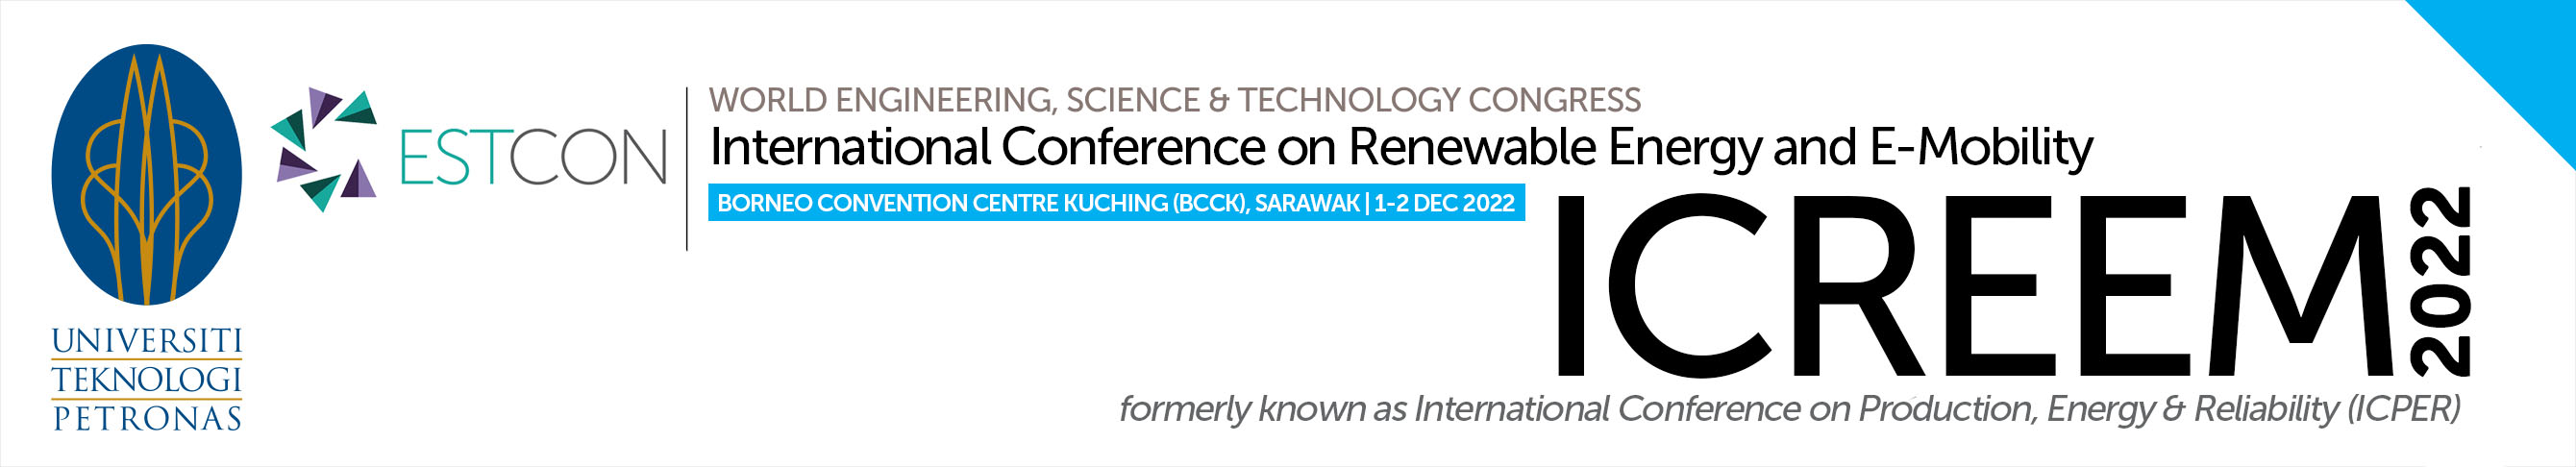 International Conference on Renewable Energy and E-mobility (ICREEM2022)